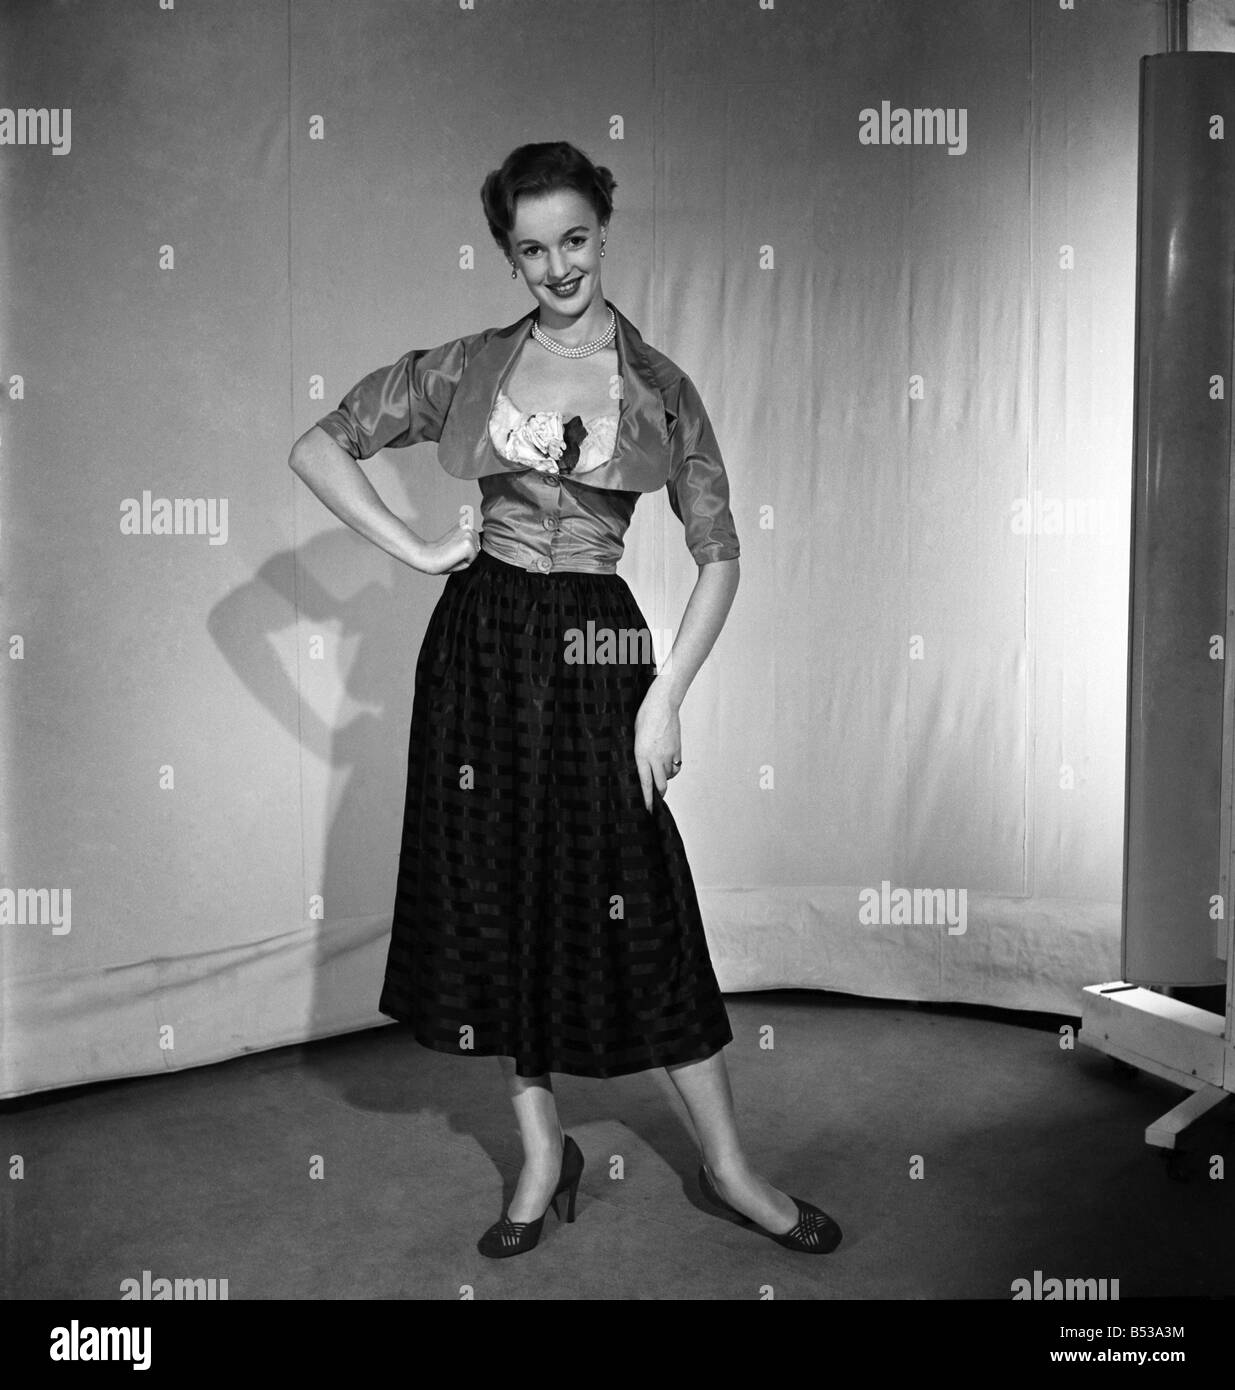 Woman model 1950s Black and White Stock Photos & Images - Alamy